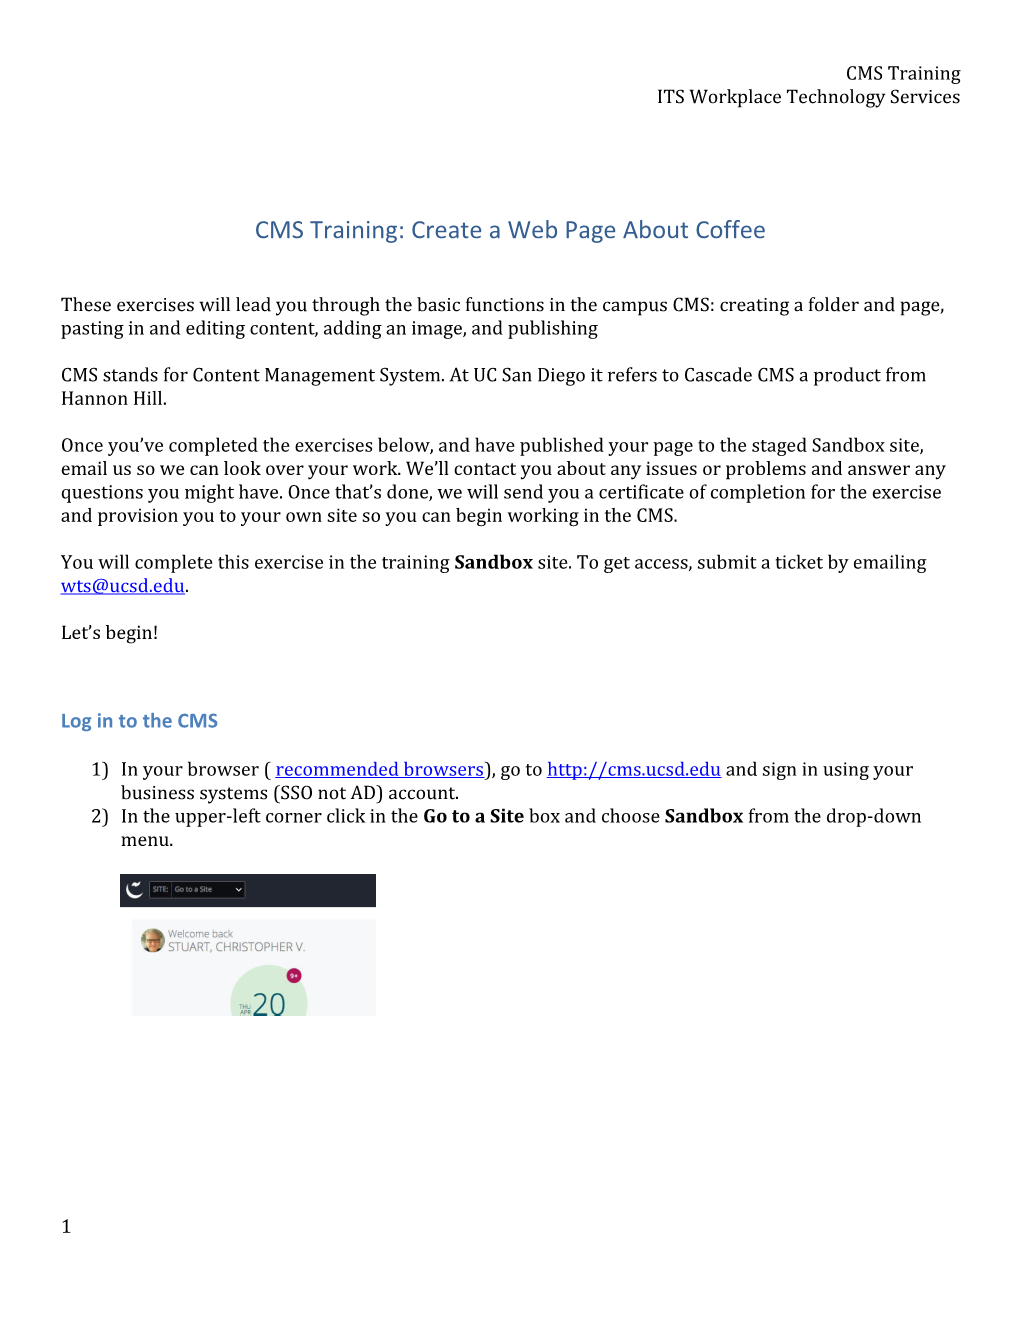 CMS Training: Create a Web Page About Coffee